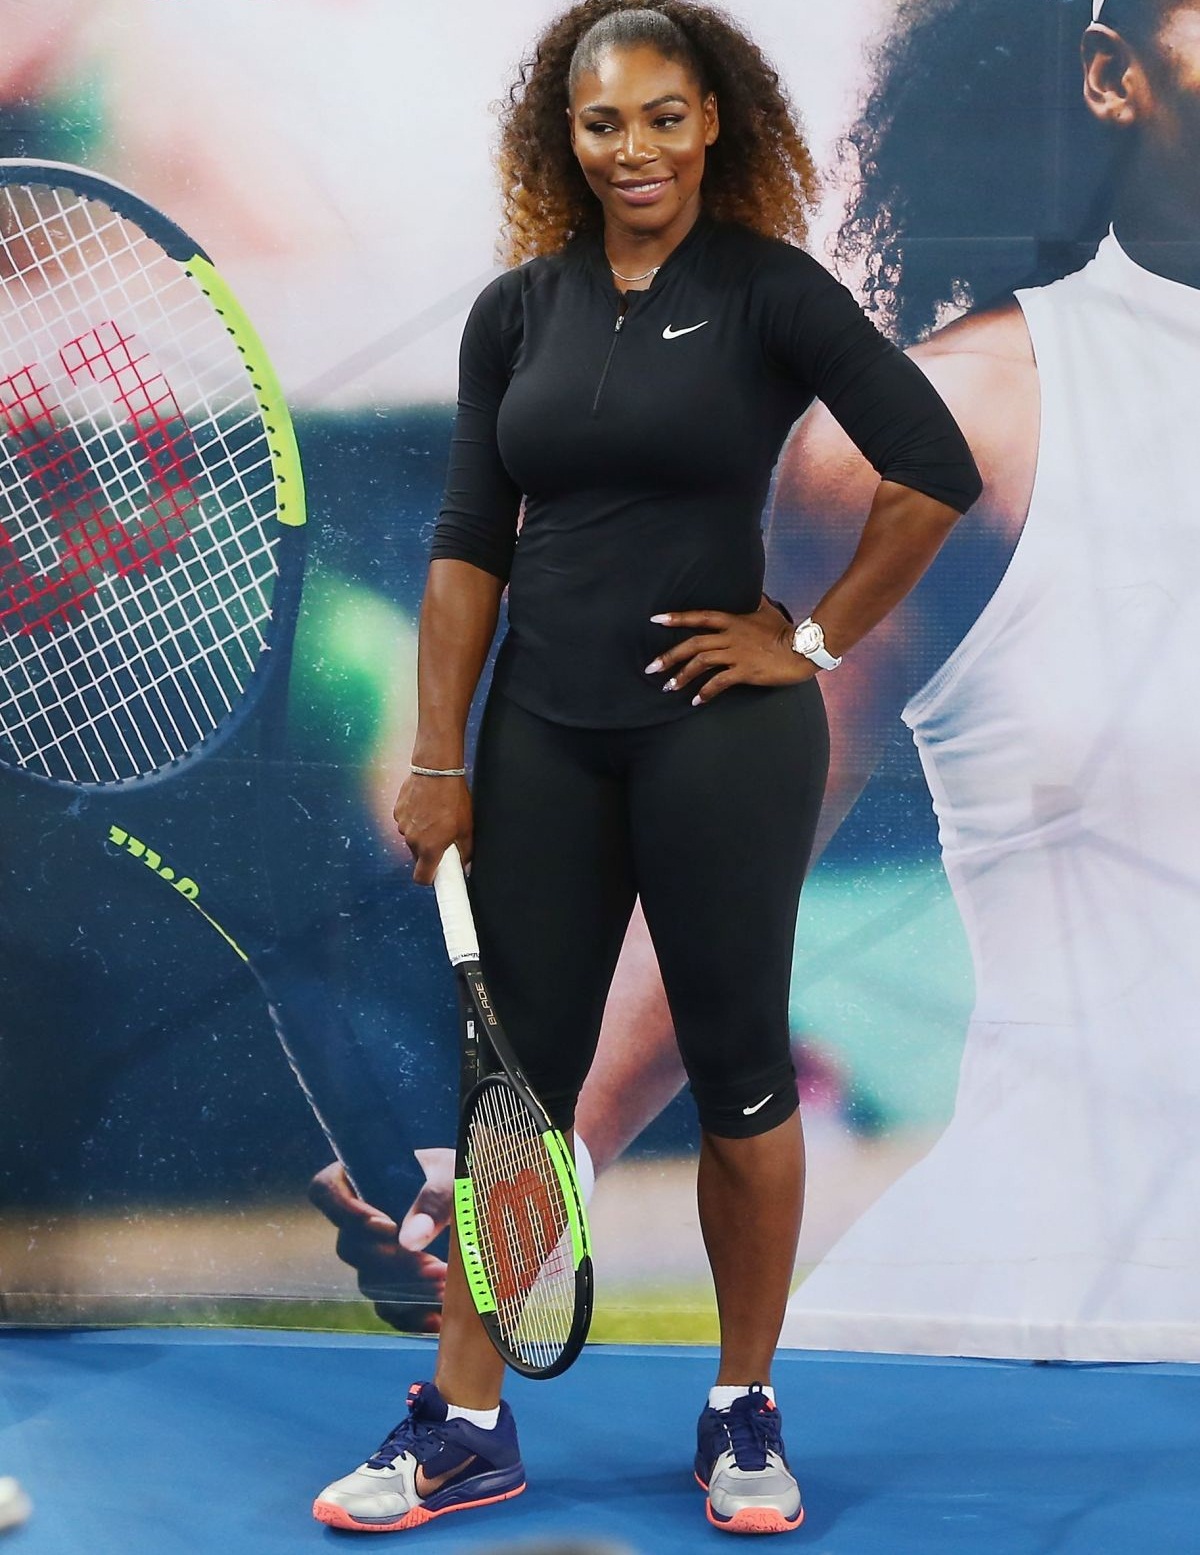 Serena Williams Is Retiring From TennisThough Not Without Misgivings   Vanity Fair